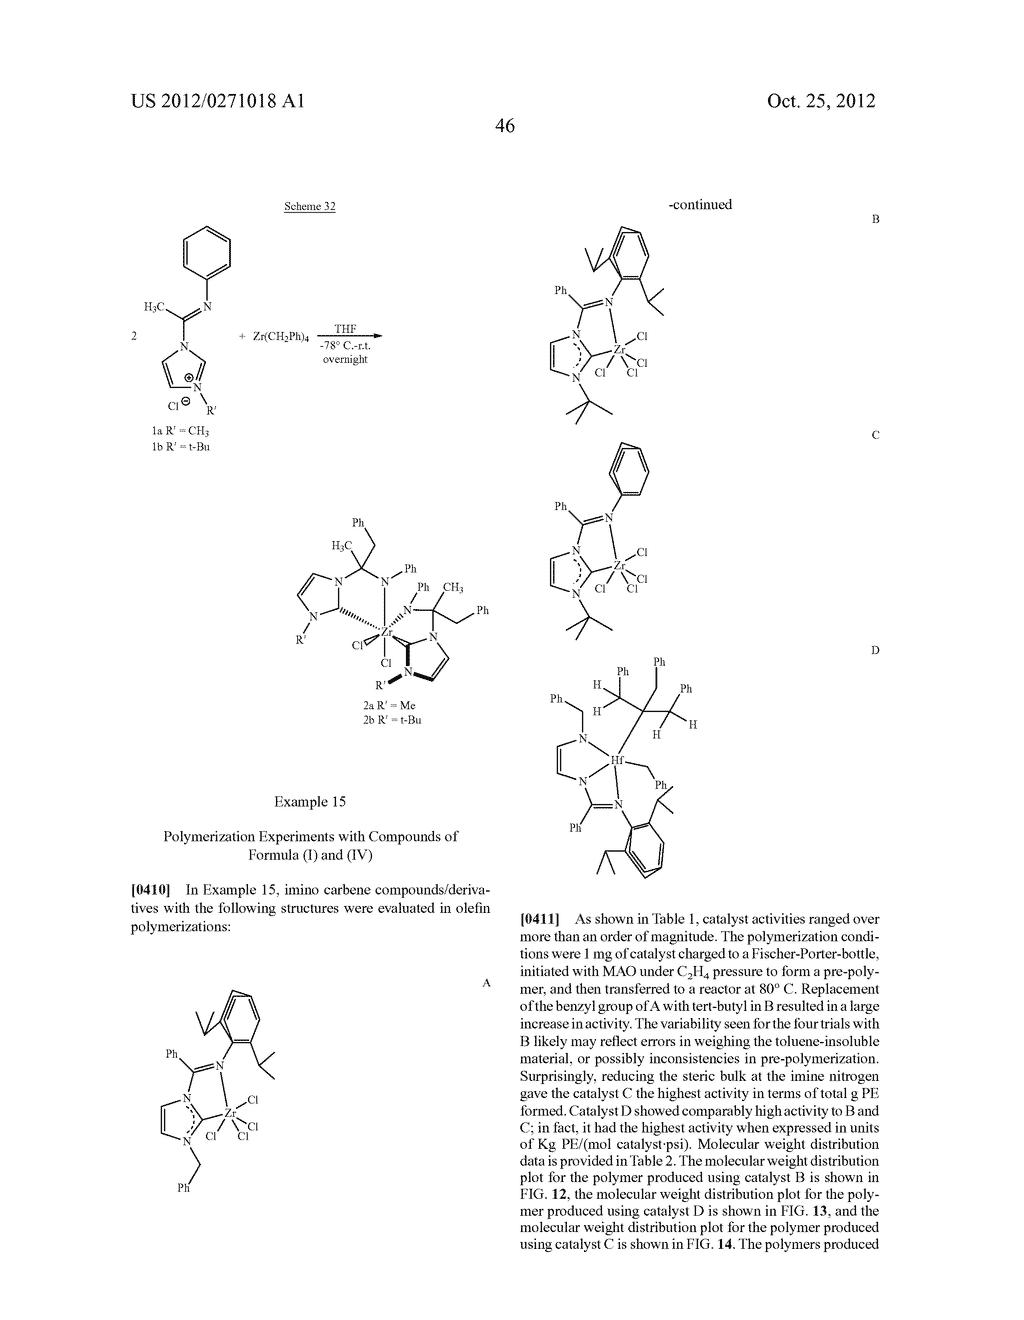 Imino Carbene Compounds and Derivatives, and Catalyst Compositions Made     Therefrom - diagram, schematic, and image 63